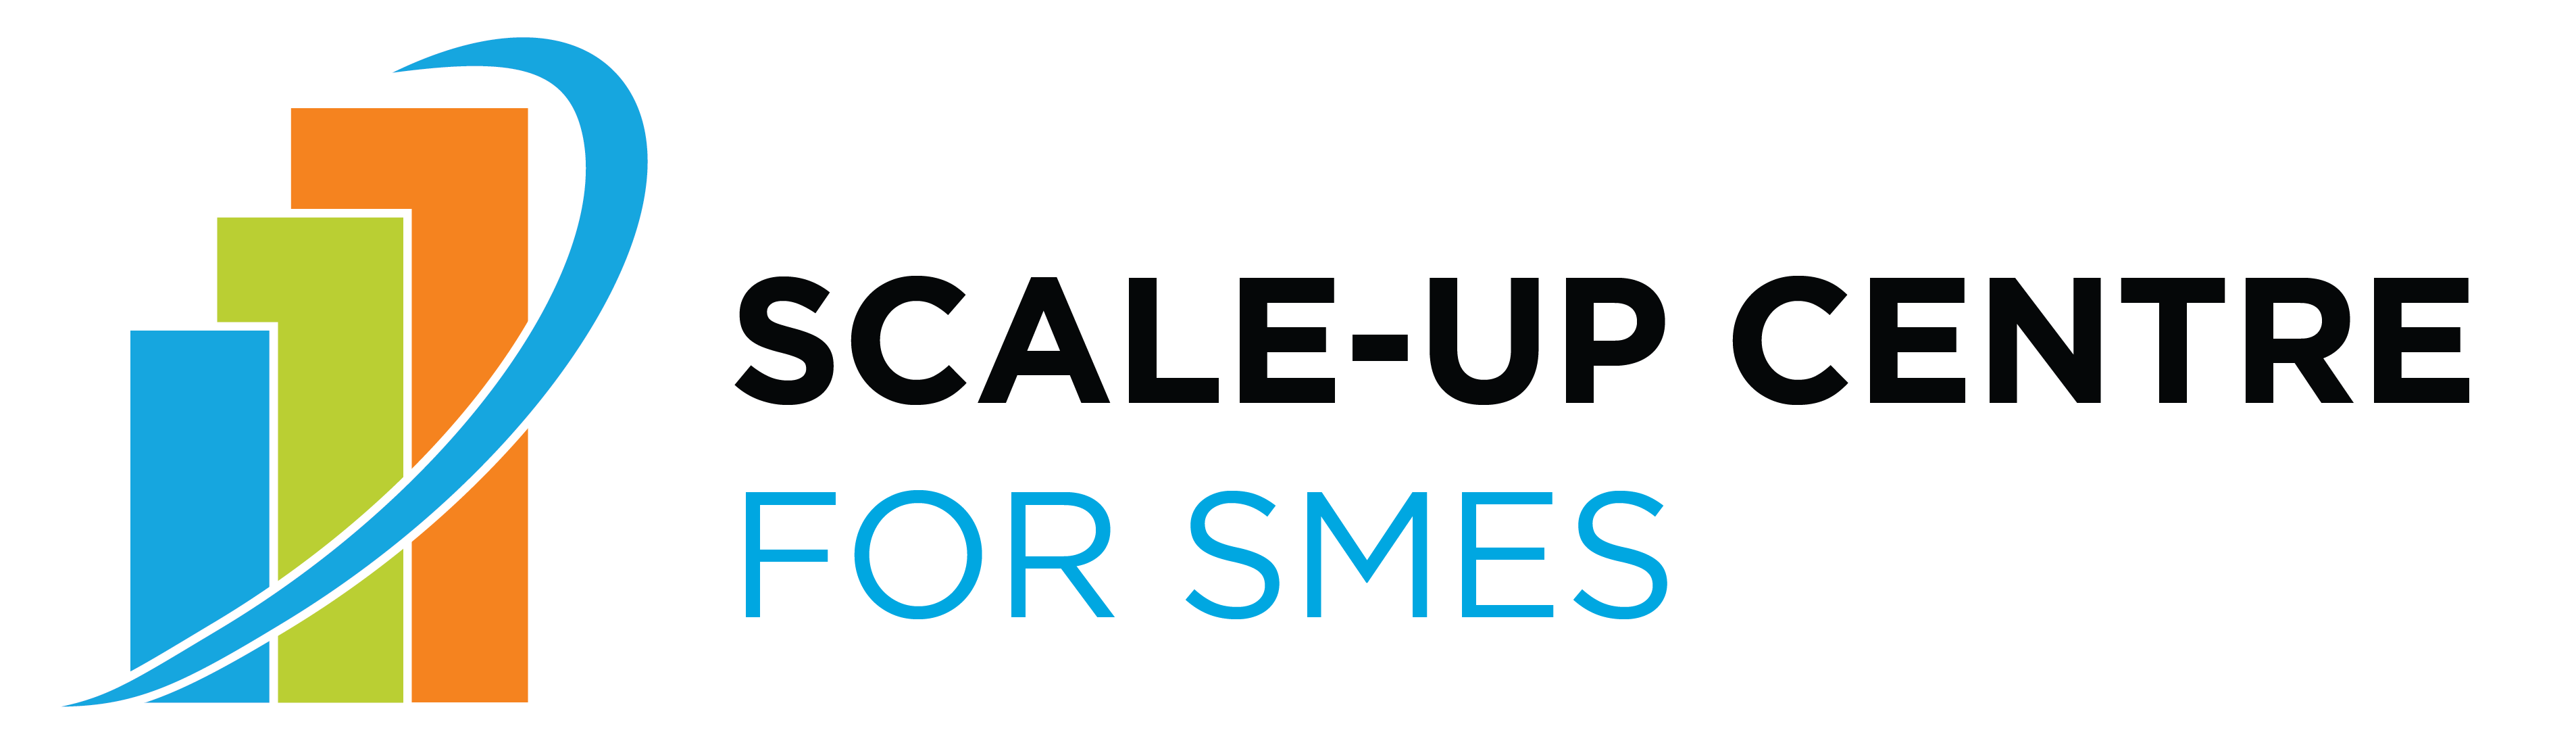 Scale-up Centre for SMEs